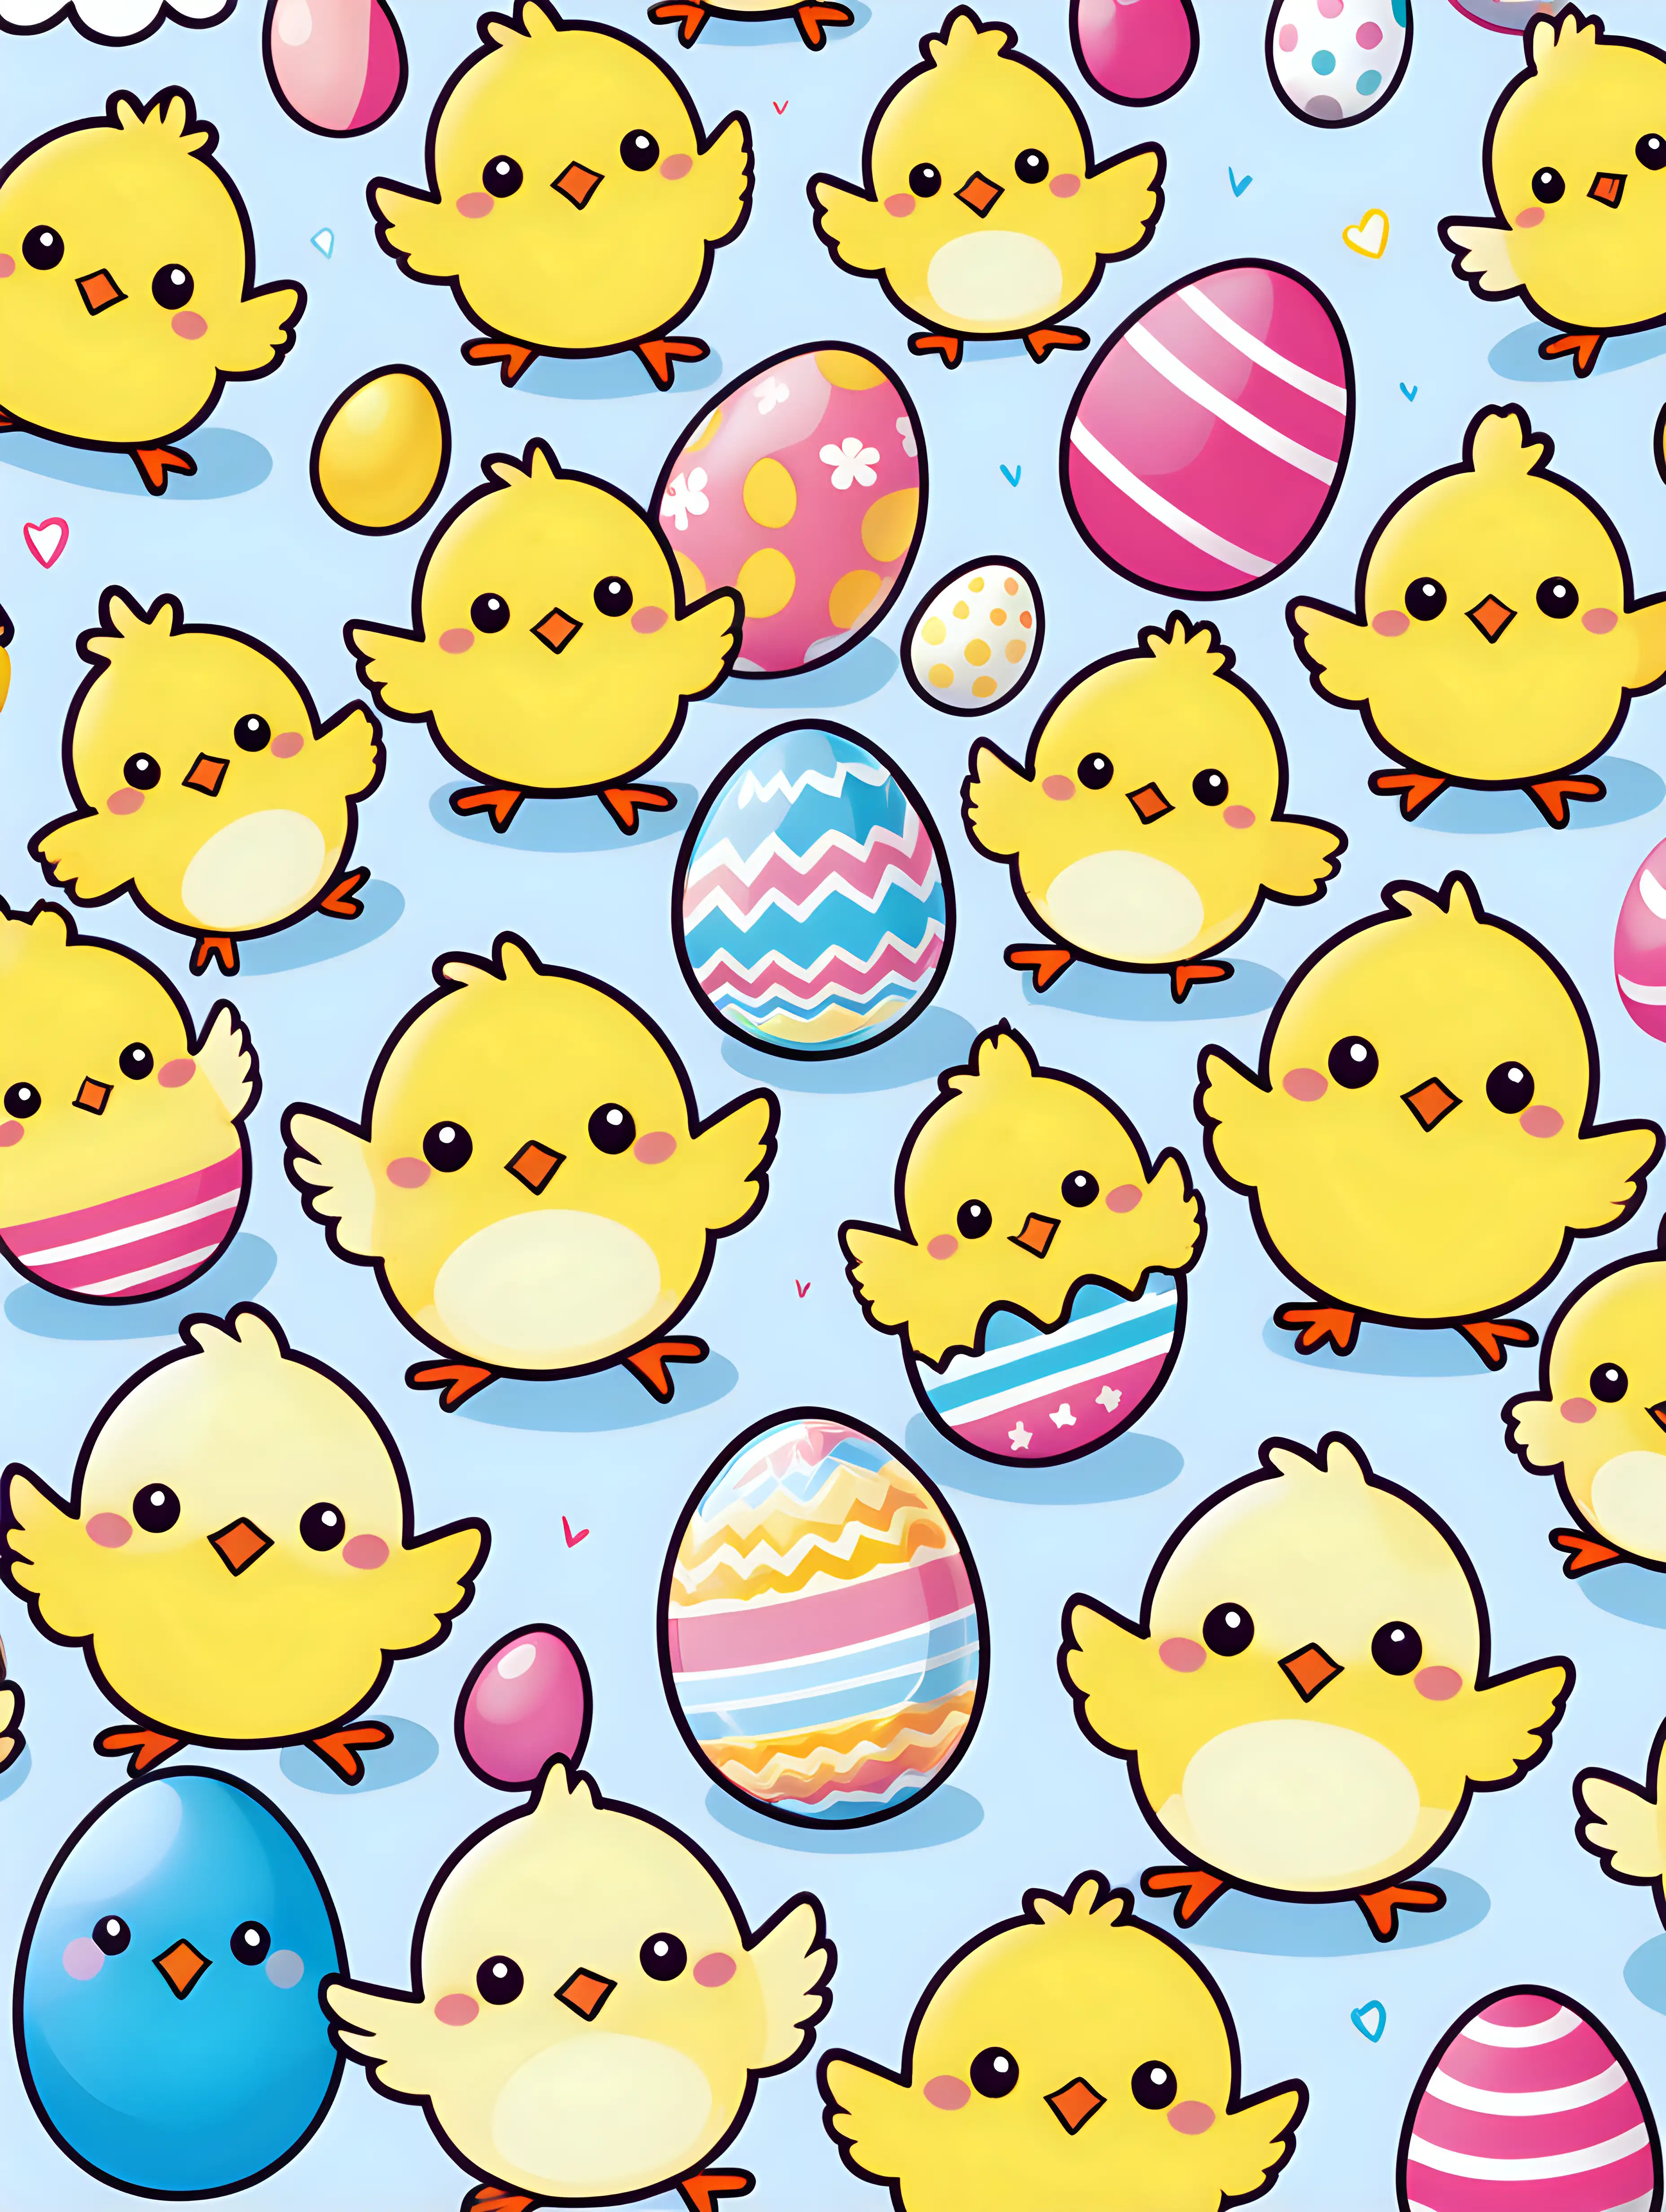 Adorable Easter Baby Chicks in Vibrant Vector Art